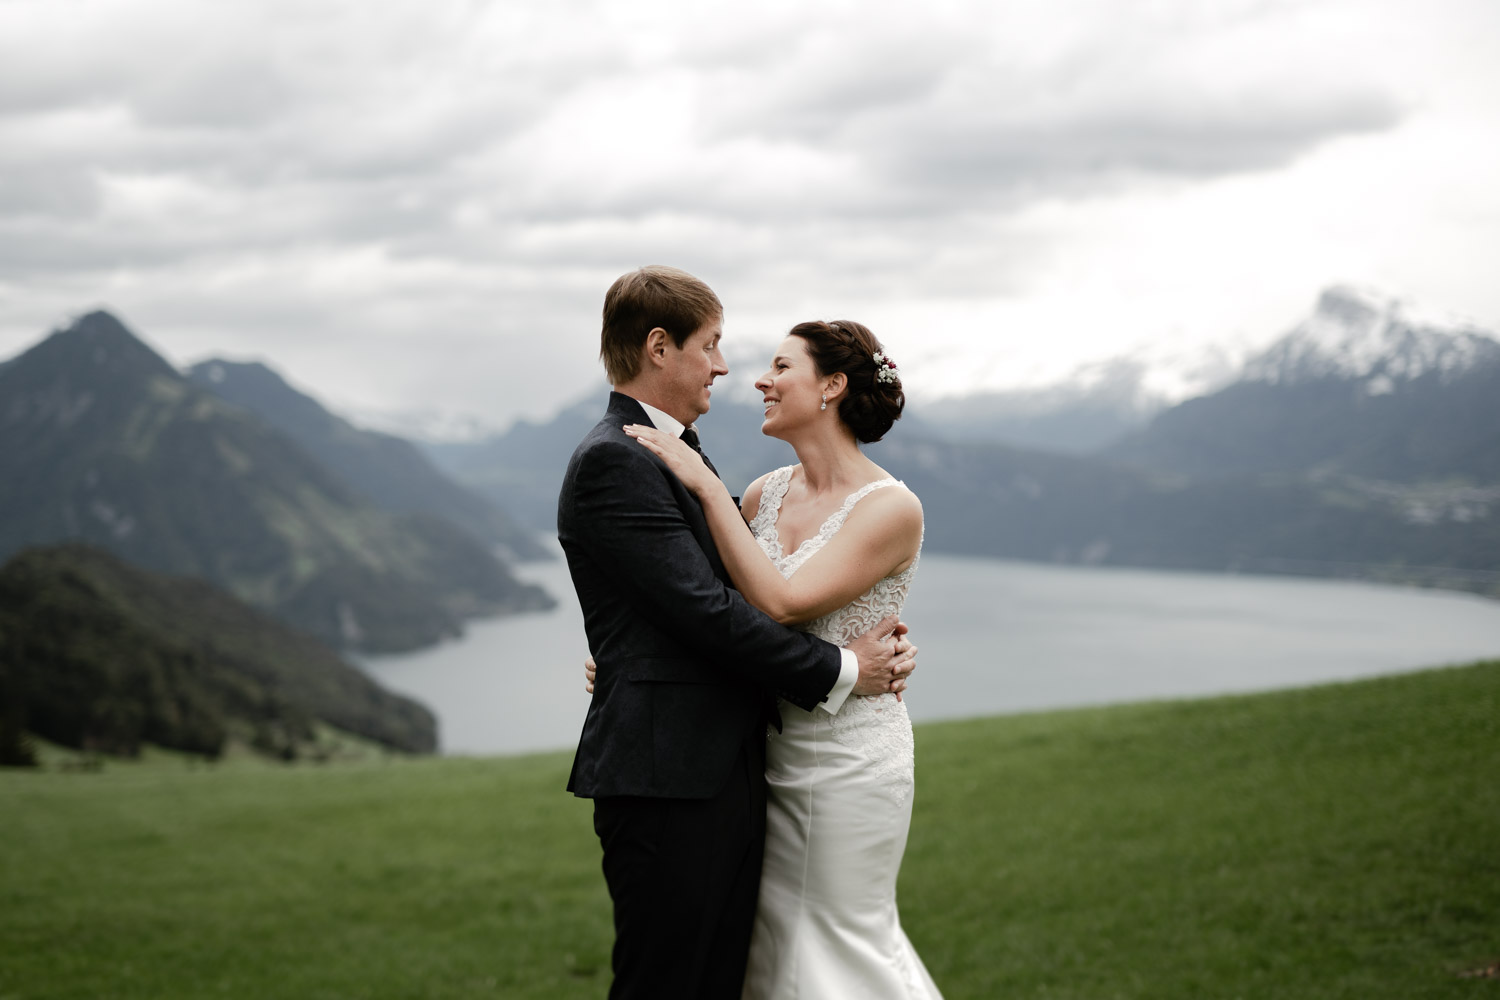 Photoshoot of bridal couple at Villa Honegg for a wedding in the Ennetbürgen chapel